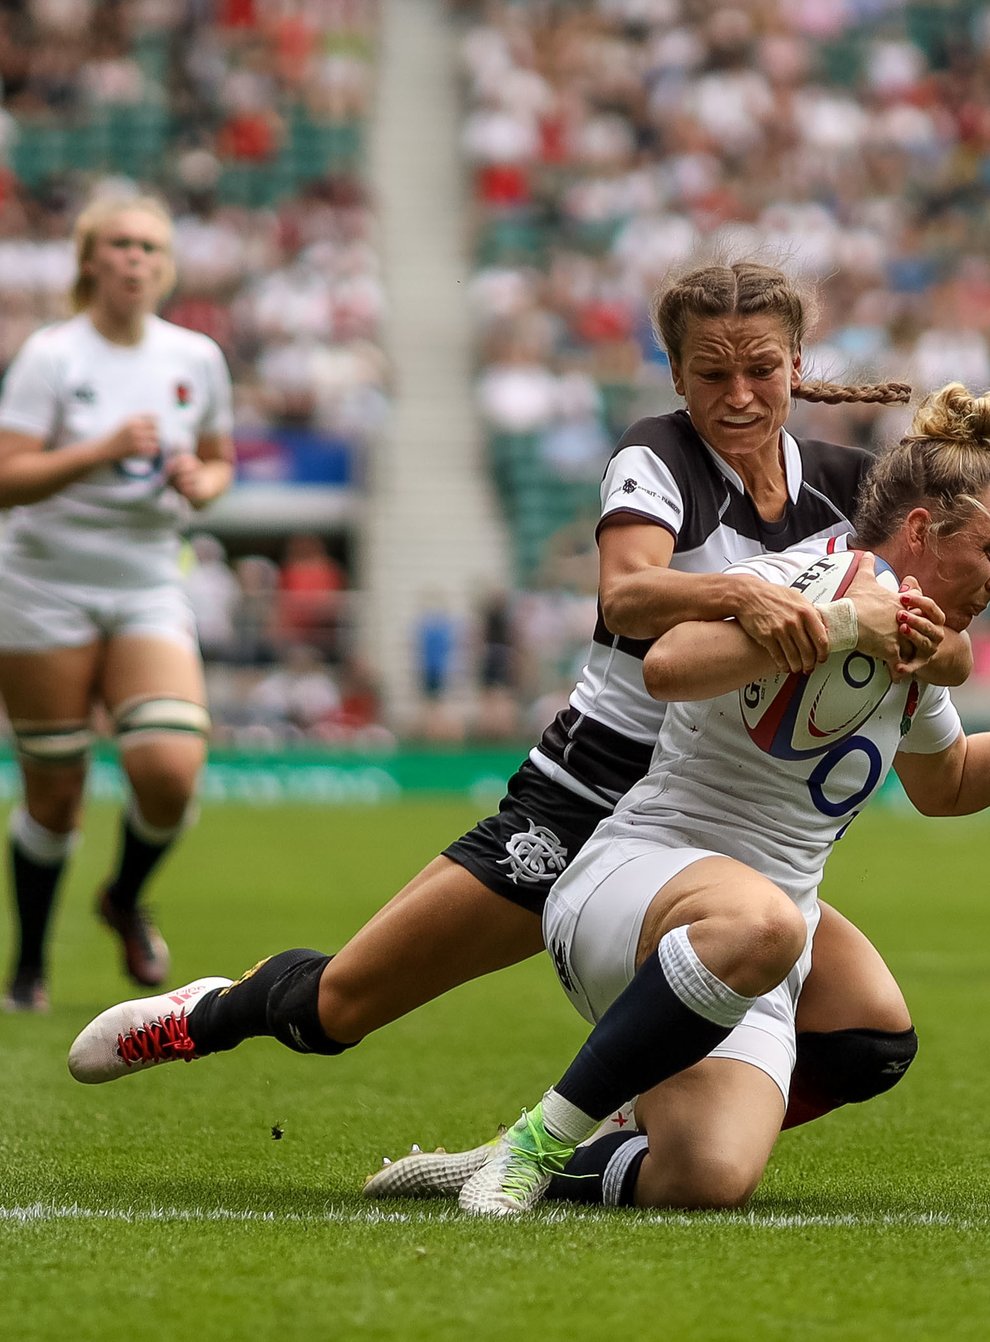 Sarah McKenna says it was 'amazing' to play in front of 35,000 people at Twickenham (PA Images)